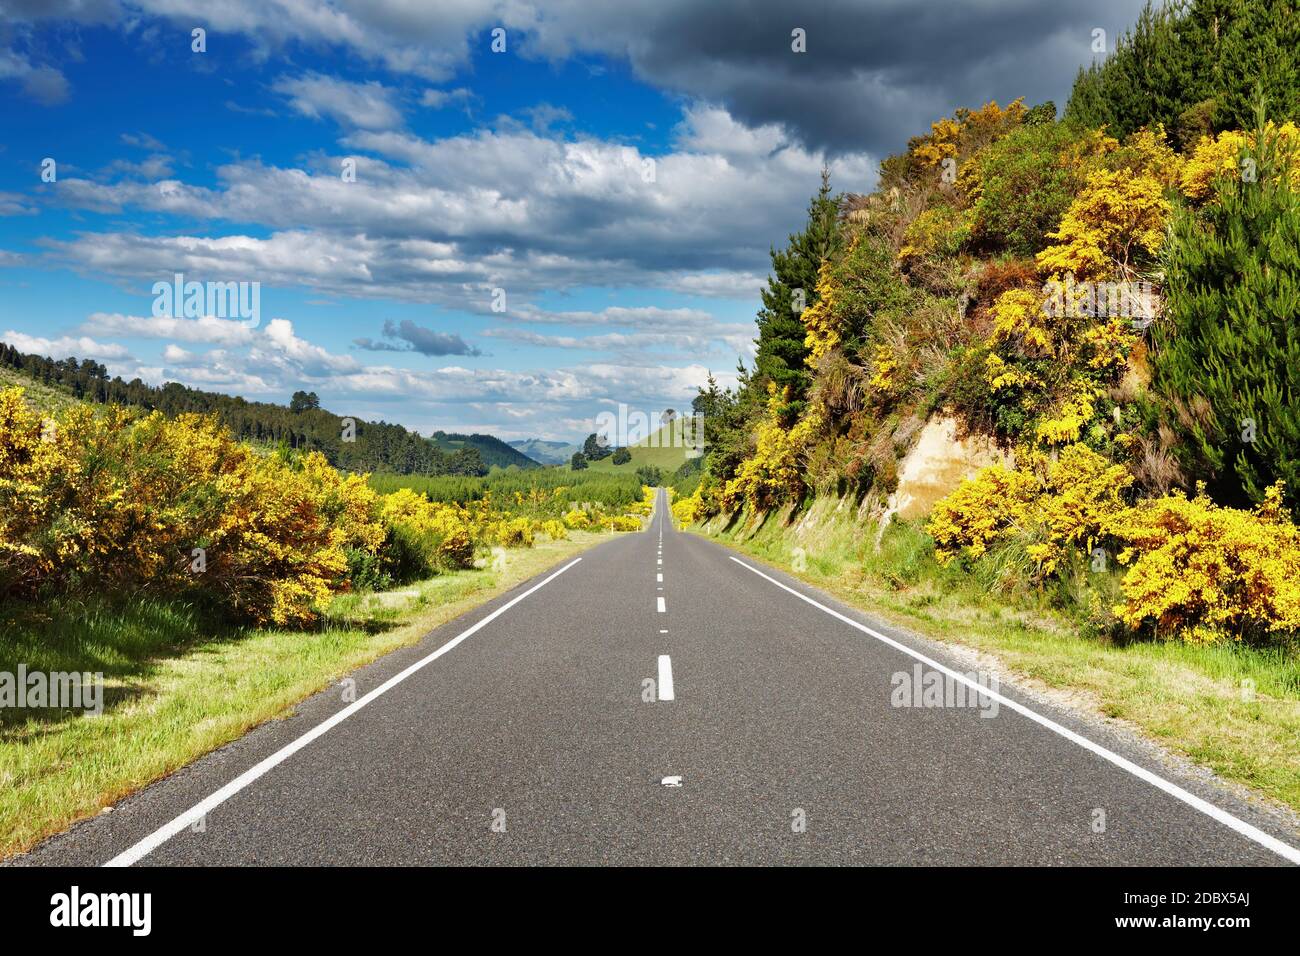 Landscape with road and forest, New Zealand Stock Photo